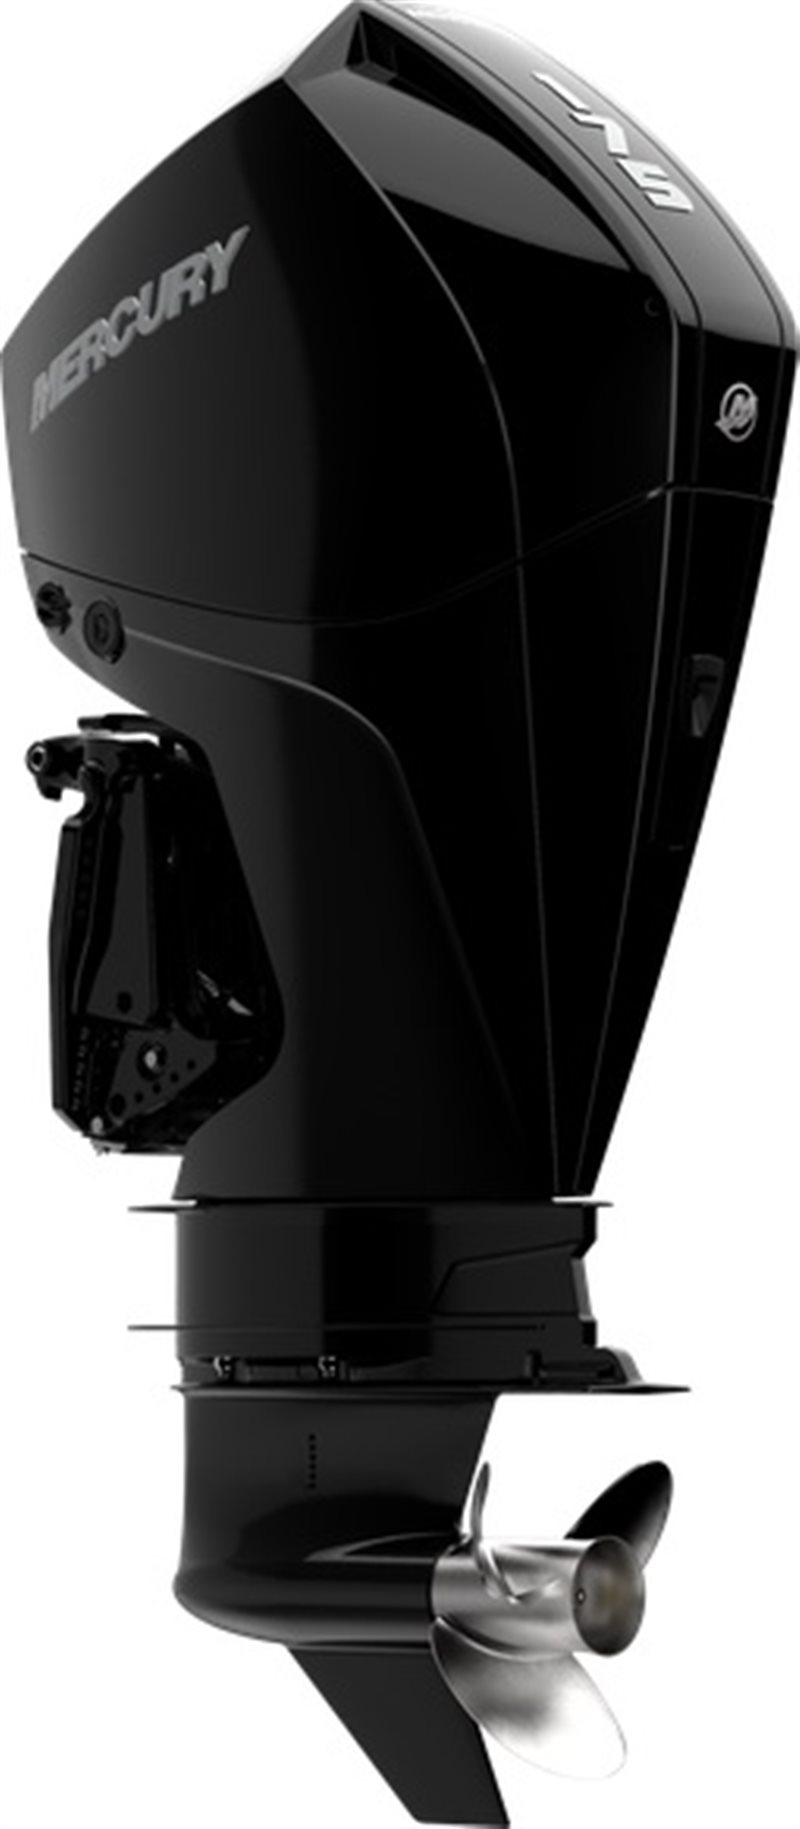 2021 Mercury Outboard Fourstroke 175 - 300 250 HP at DT Powersports & Marine